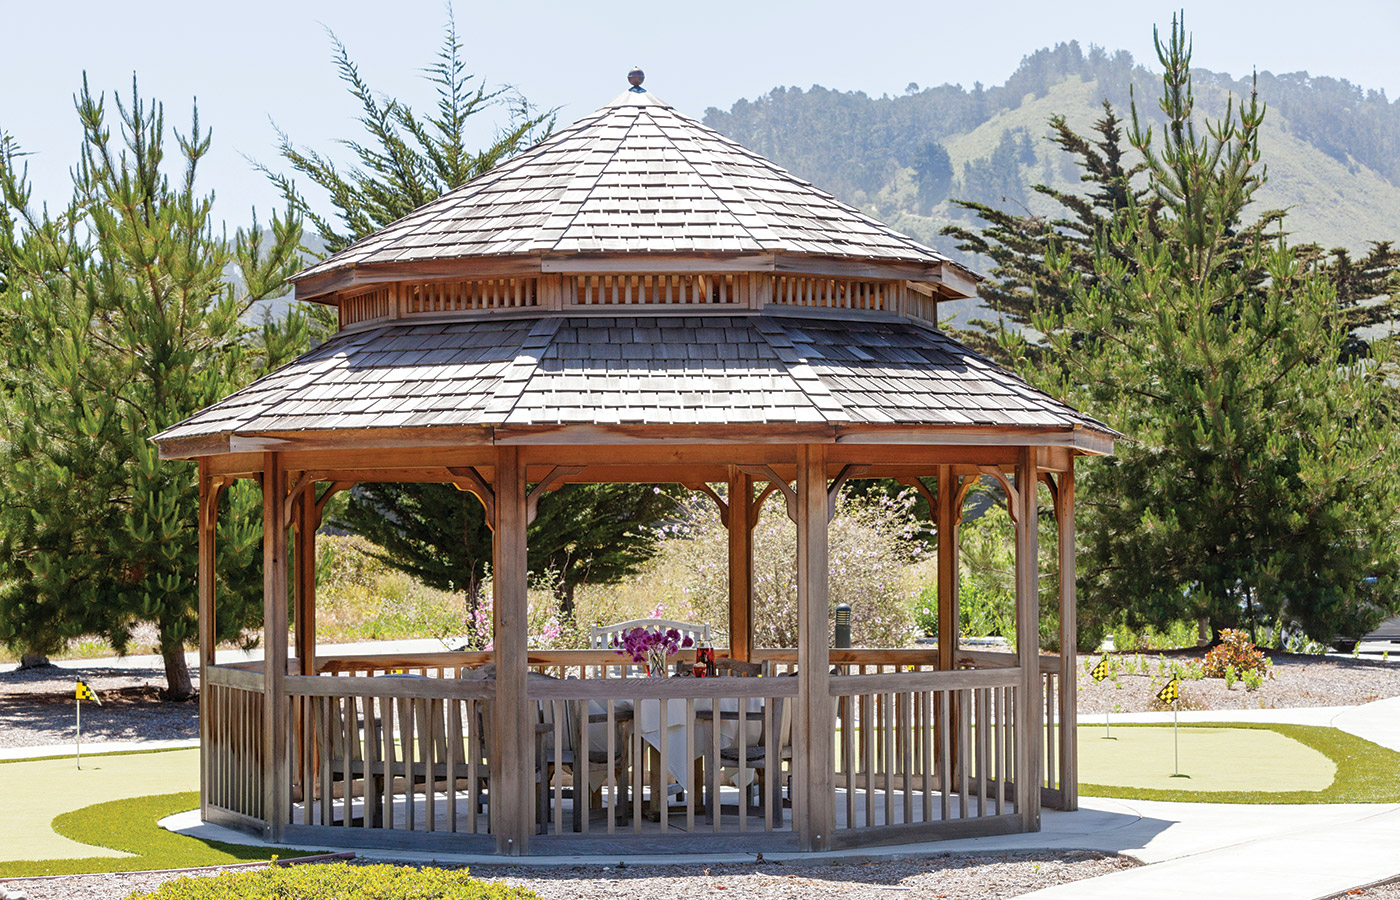 The Gazebo at The Cottages of Carmel.